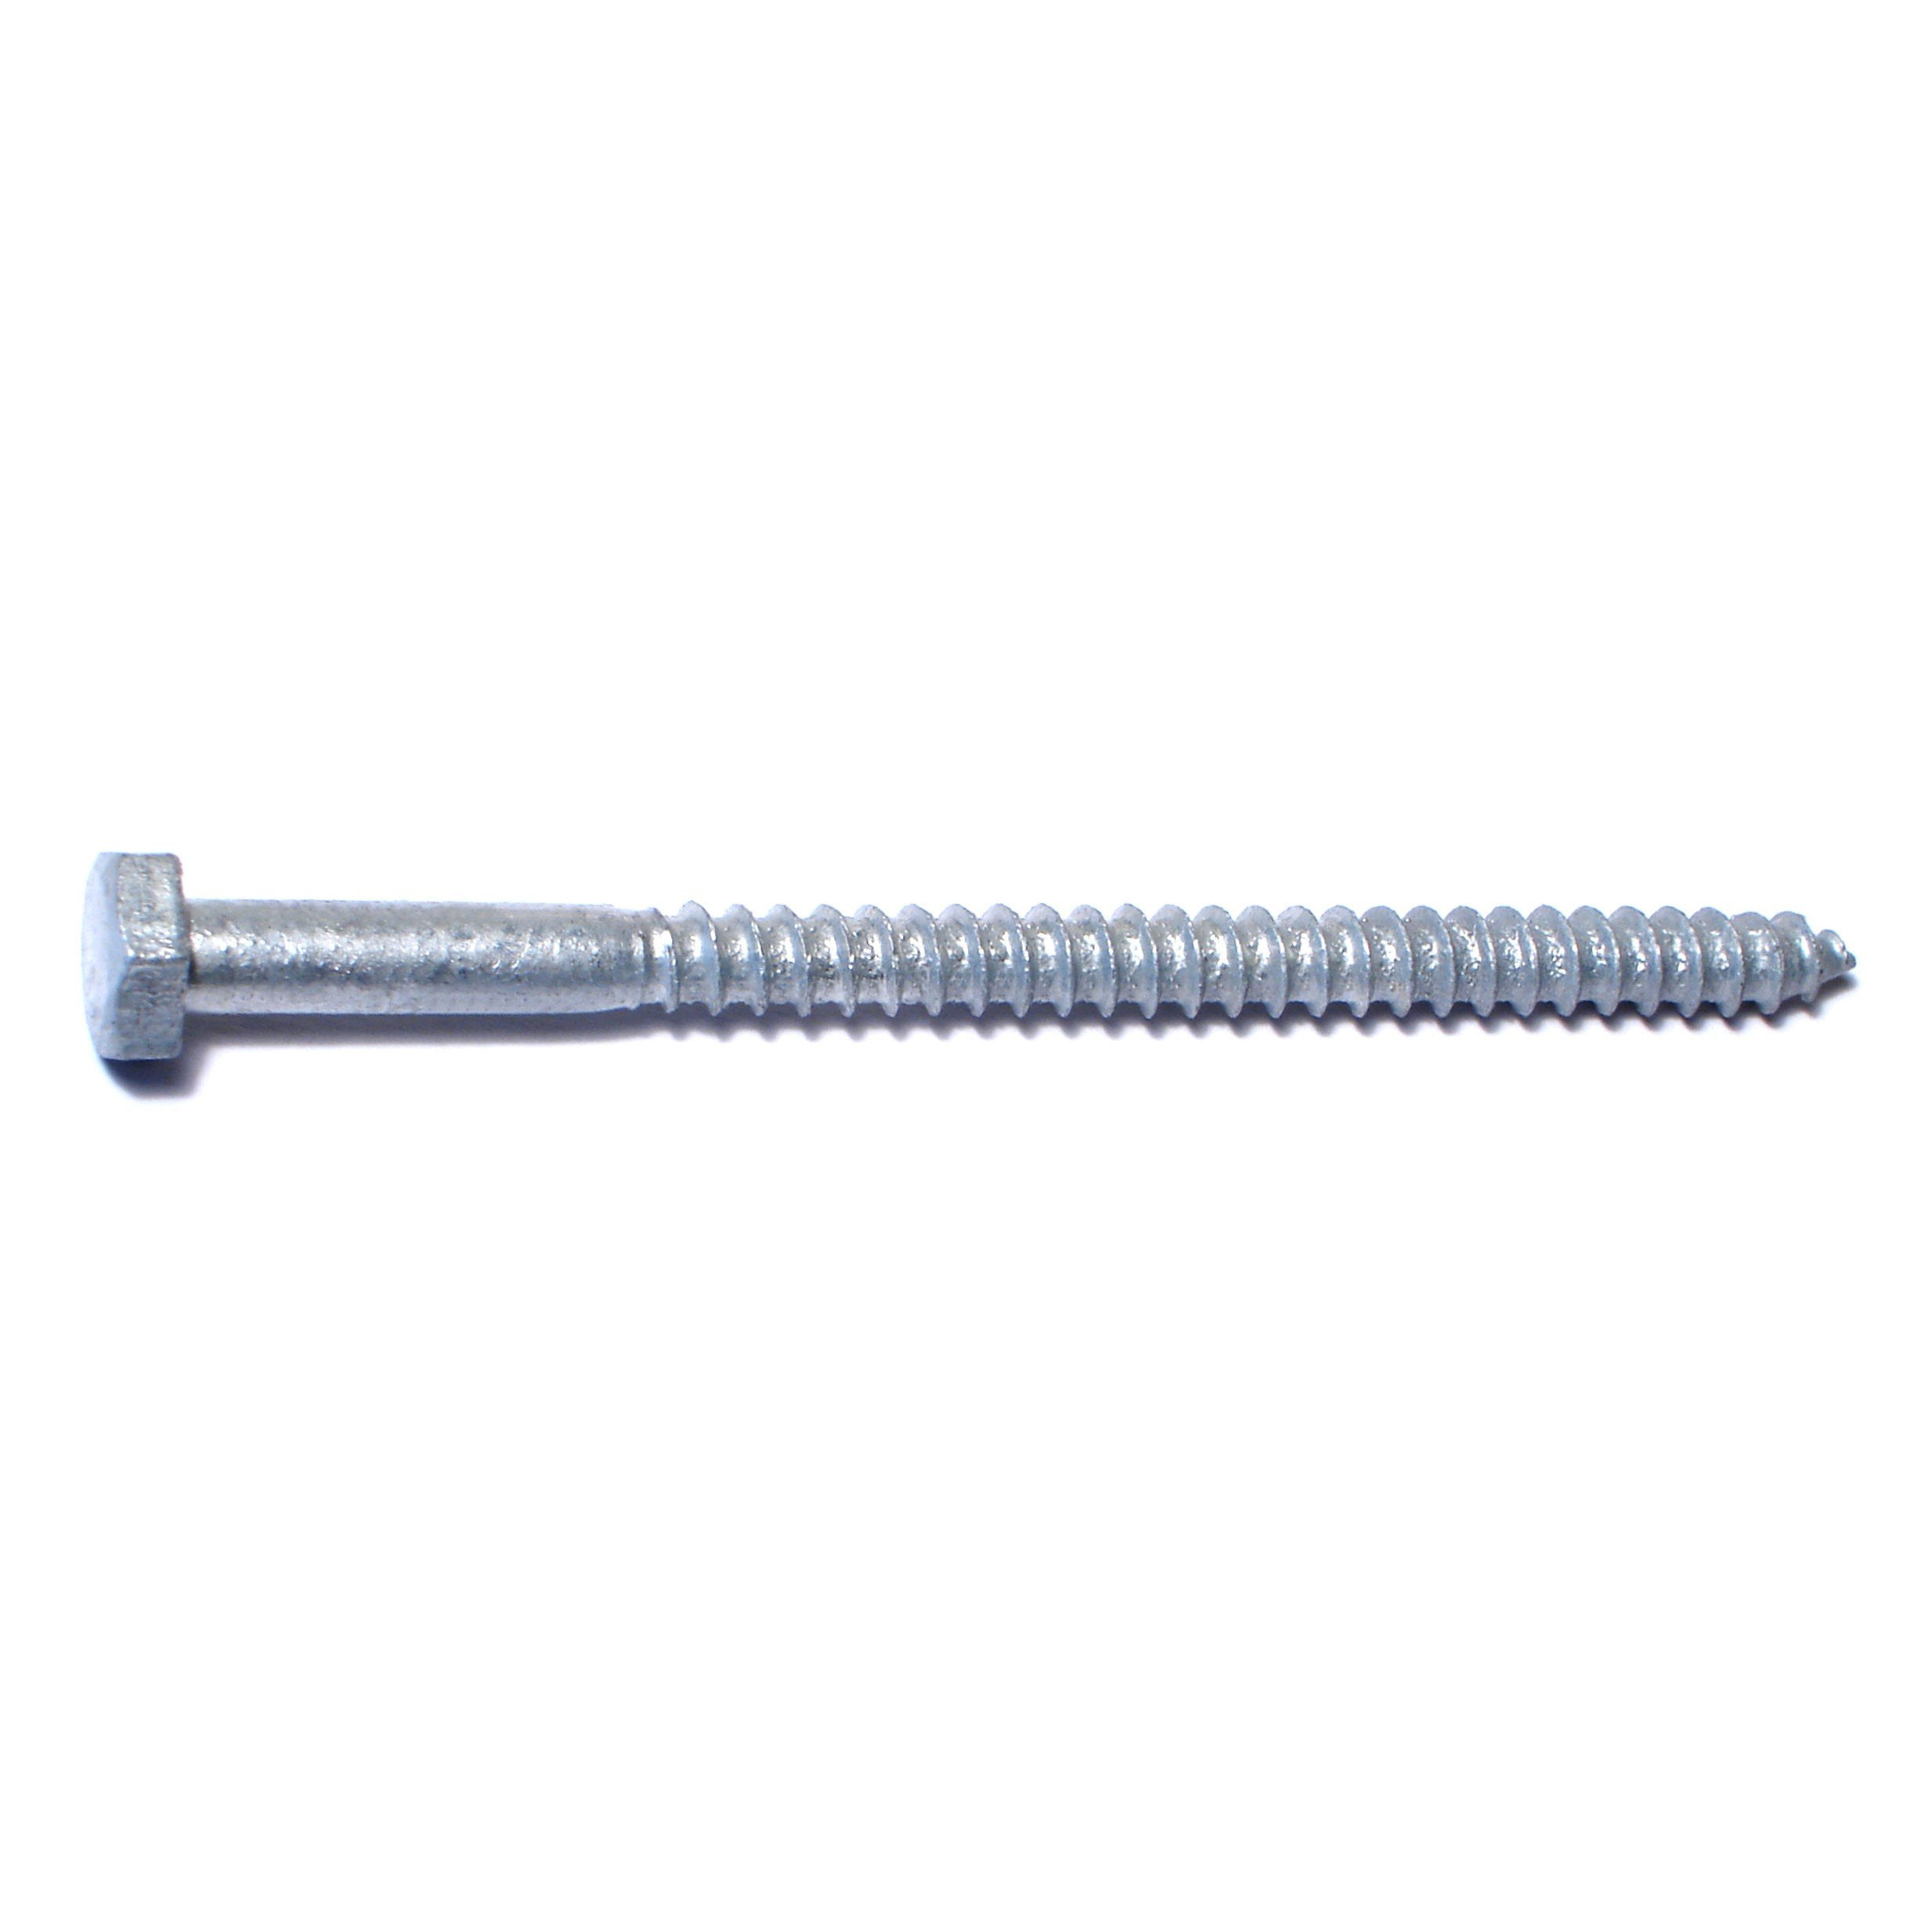 1/4 F x 1/8 F Piece-6 Hard-to-Find Fastener 014973141806 Barrel Couplings